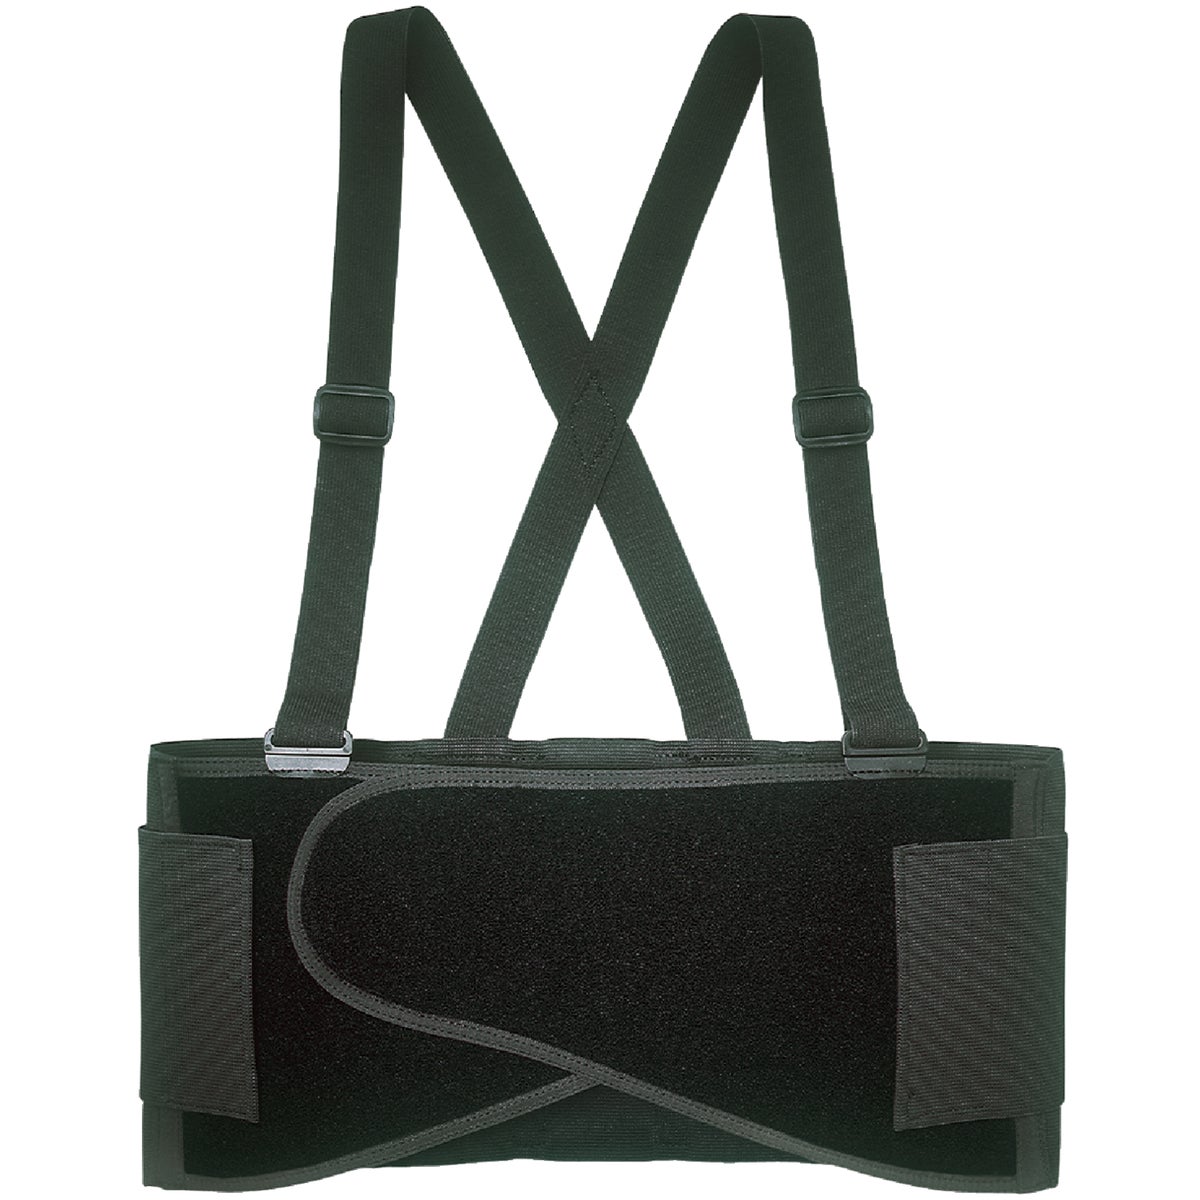 SMALL BACK SUPPORT BELT